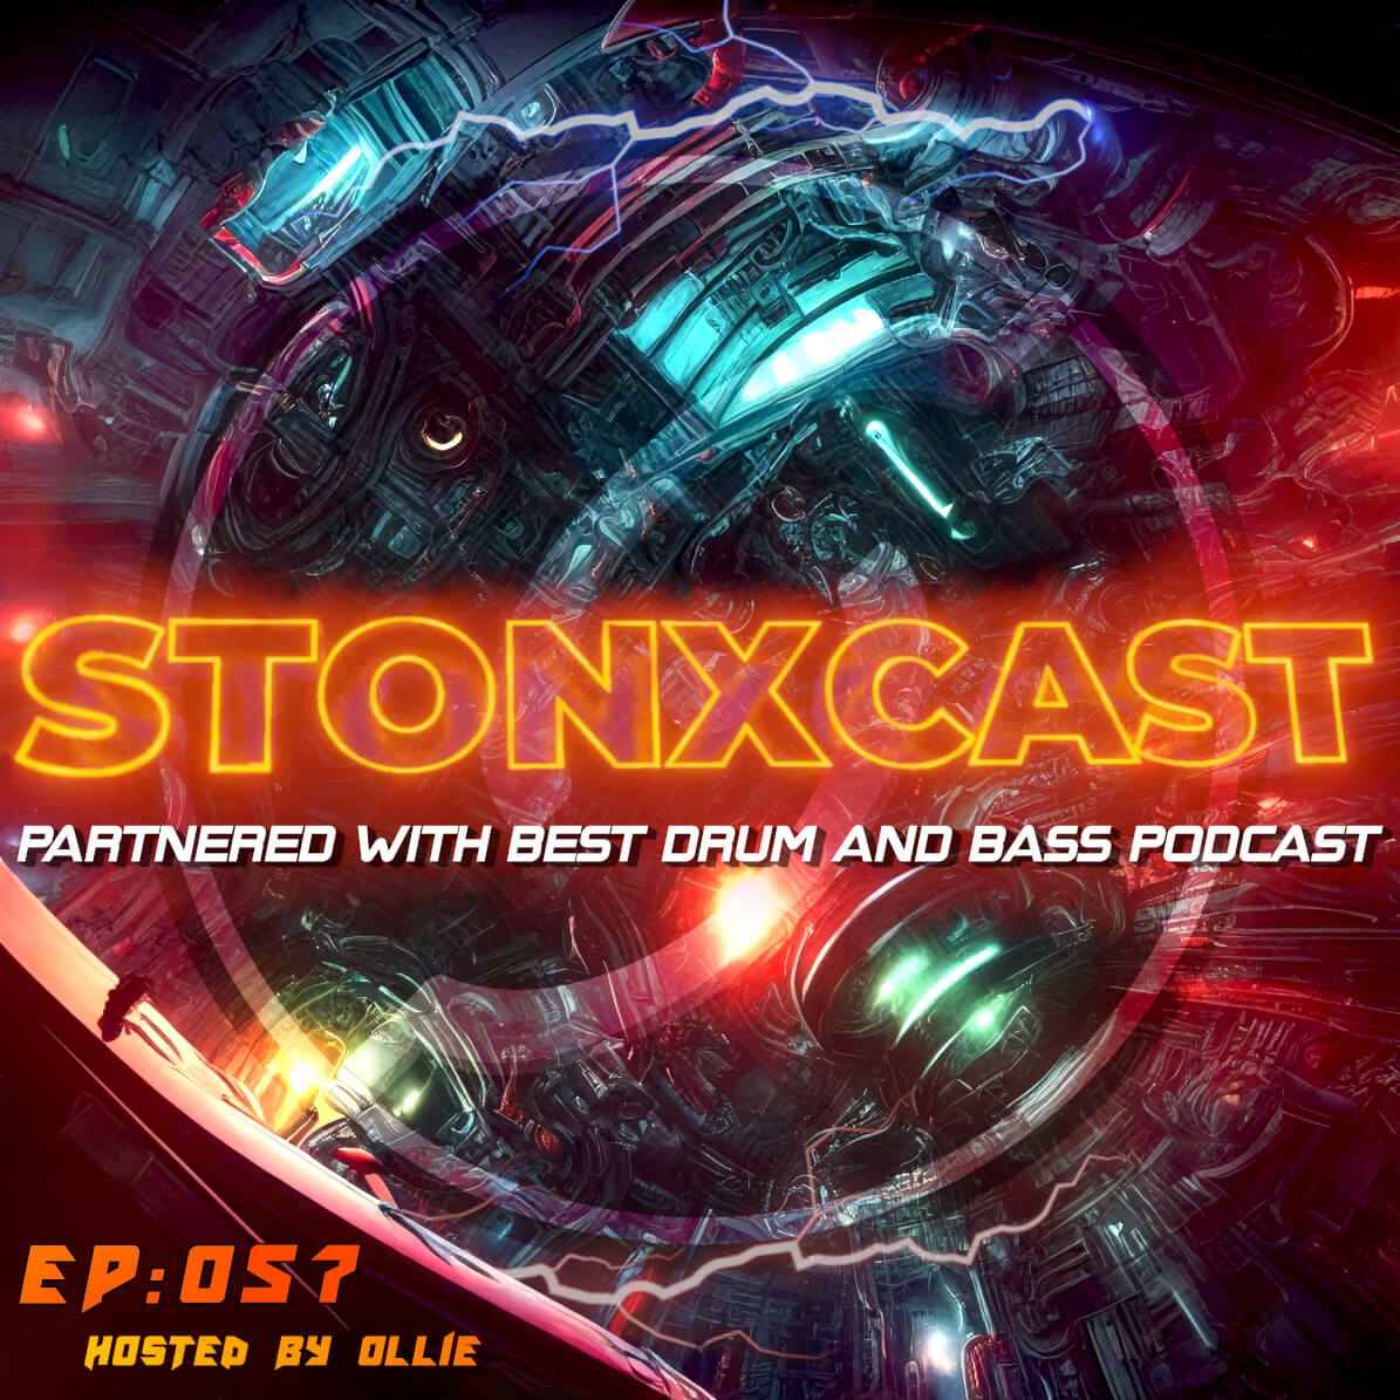 Stonxcast EP:057 - Hosted by Ollie Artwork